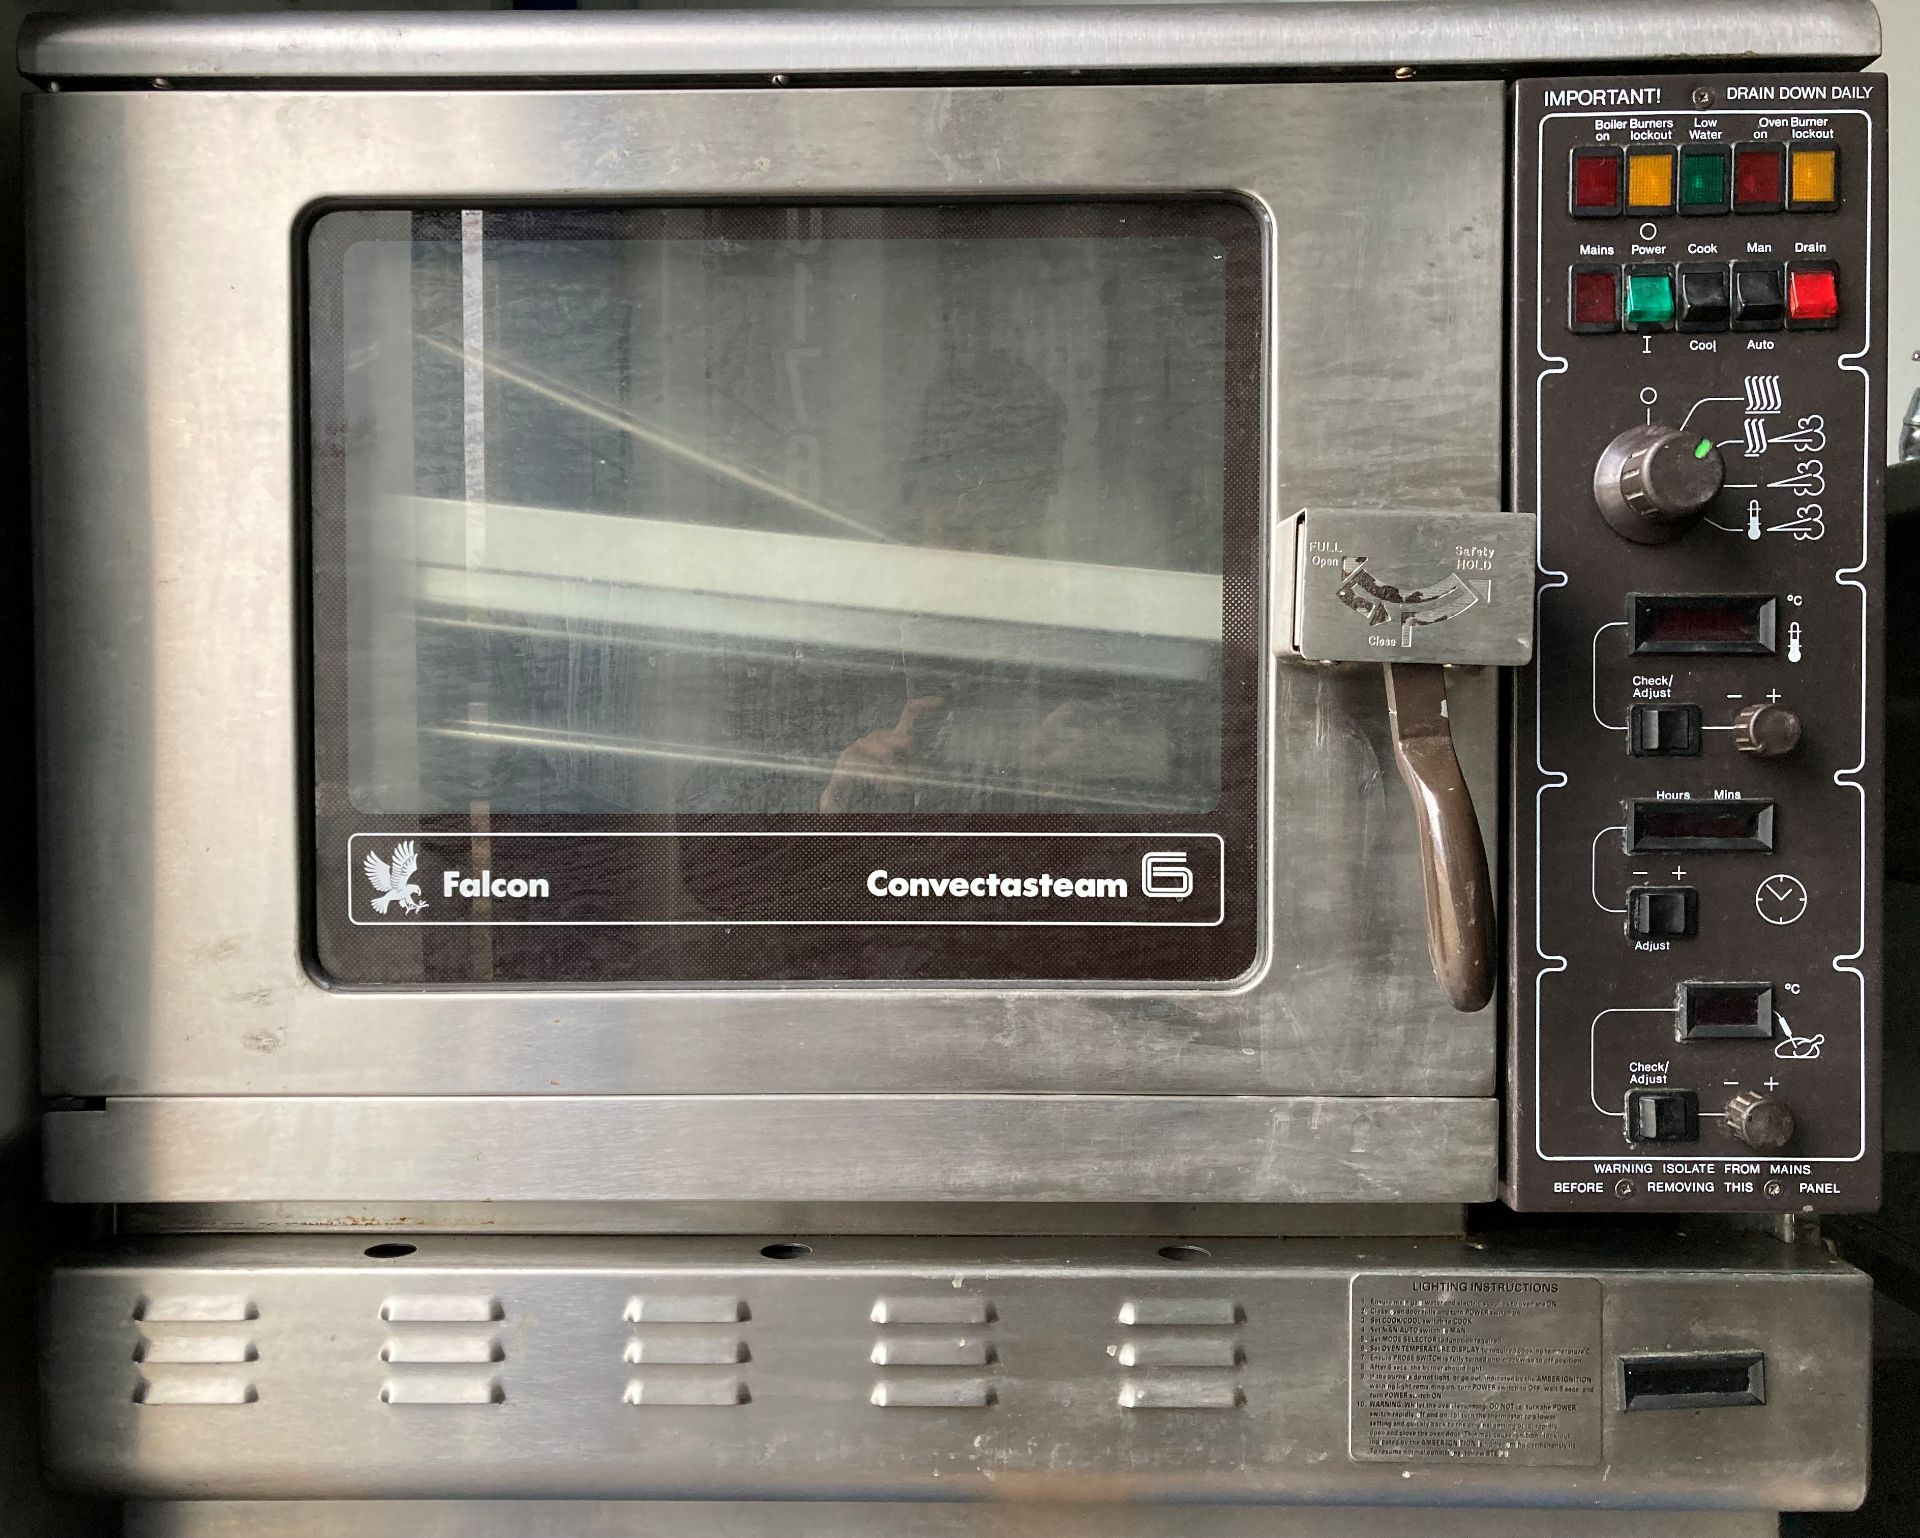 Falcon Convectasteam 6 stainless steel catering steam oven